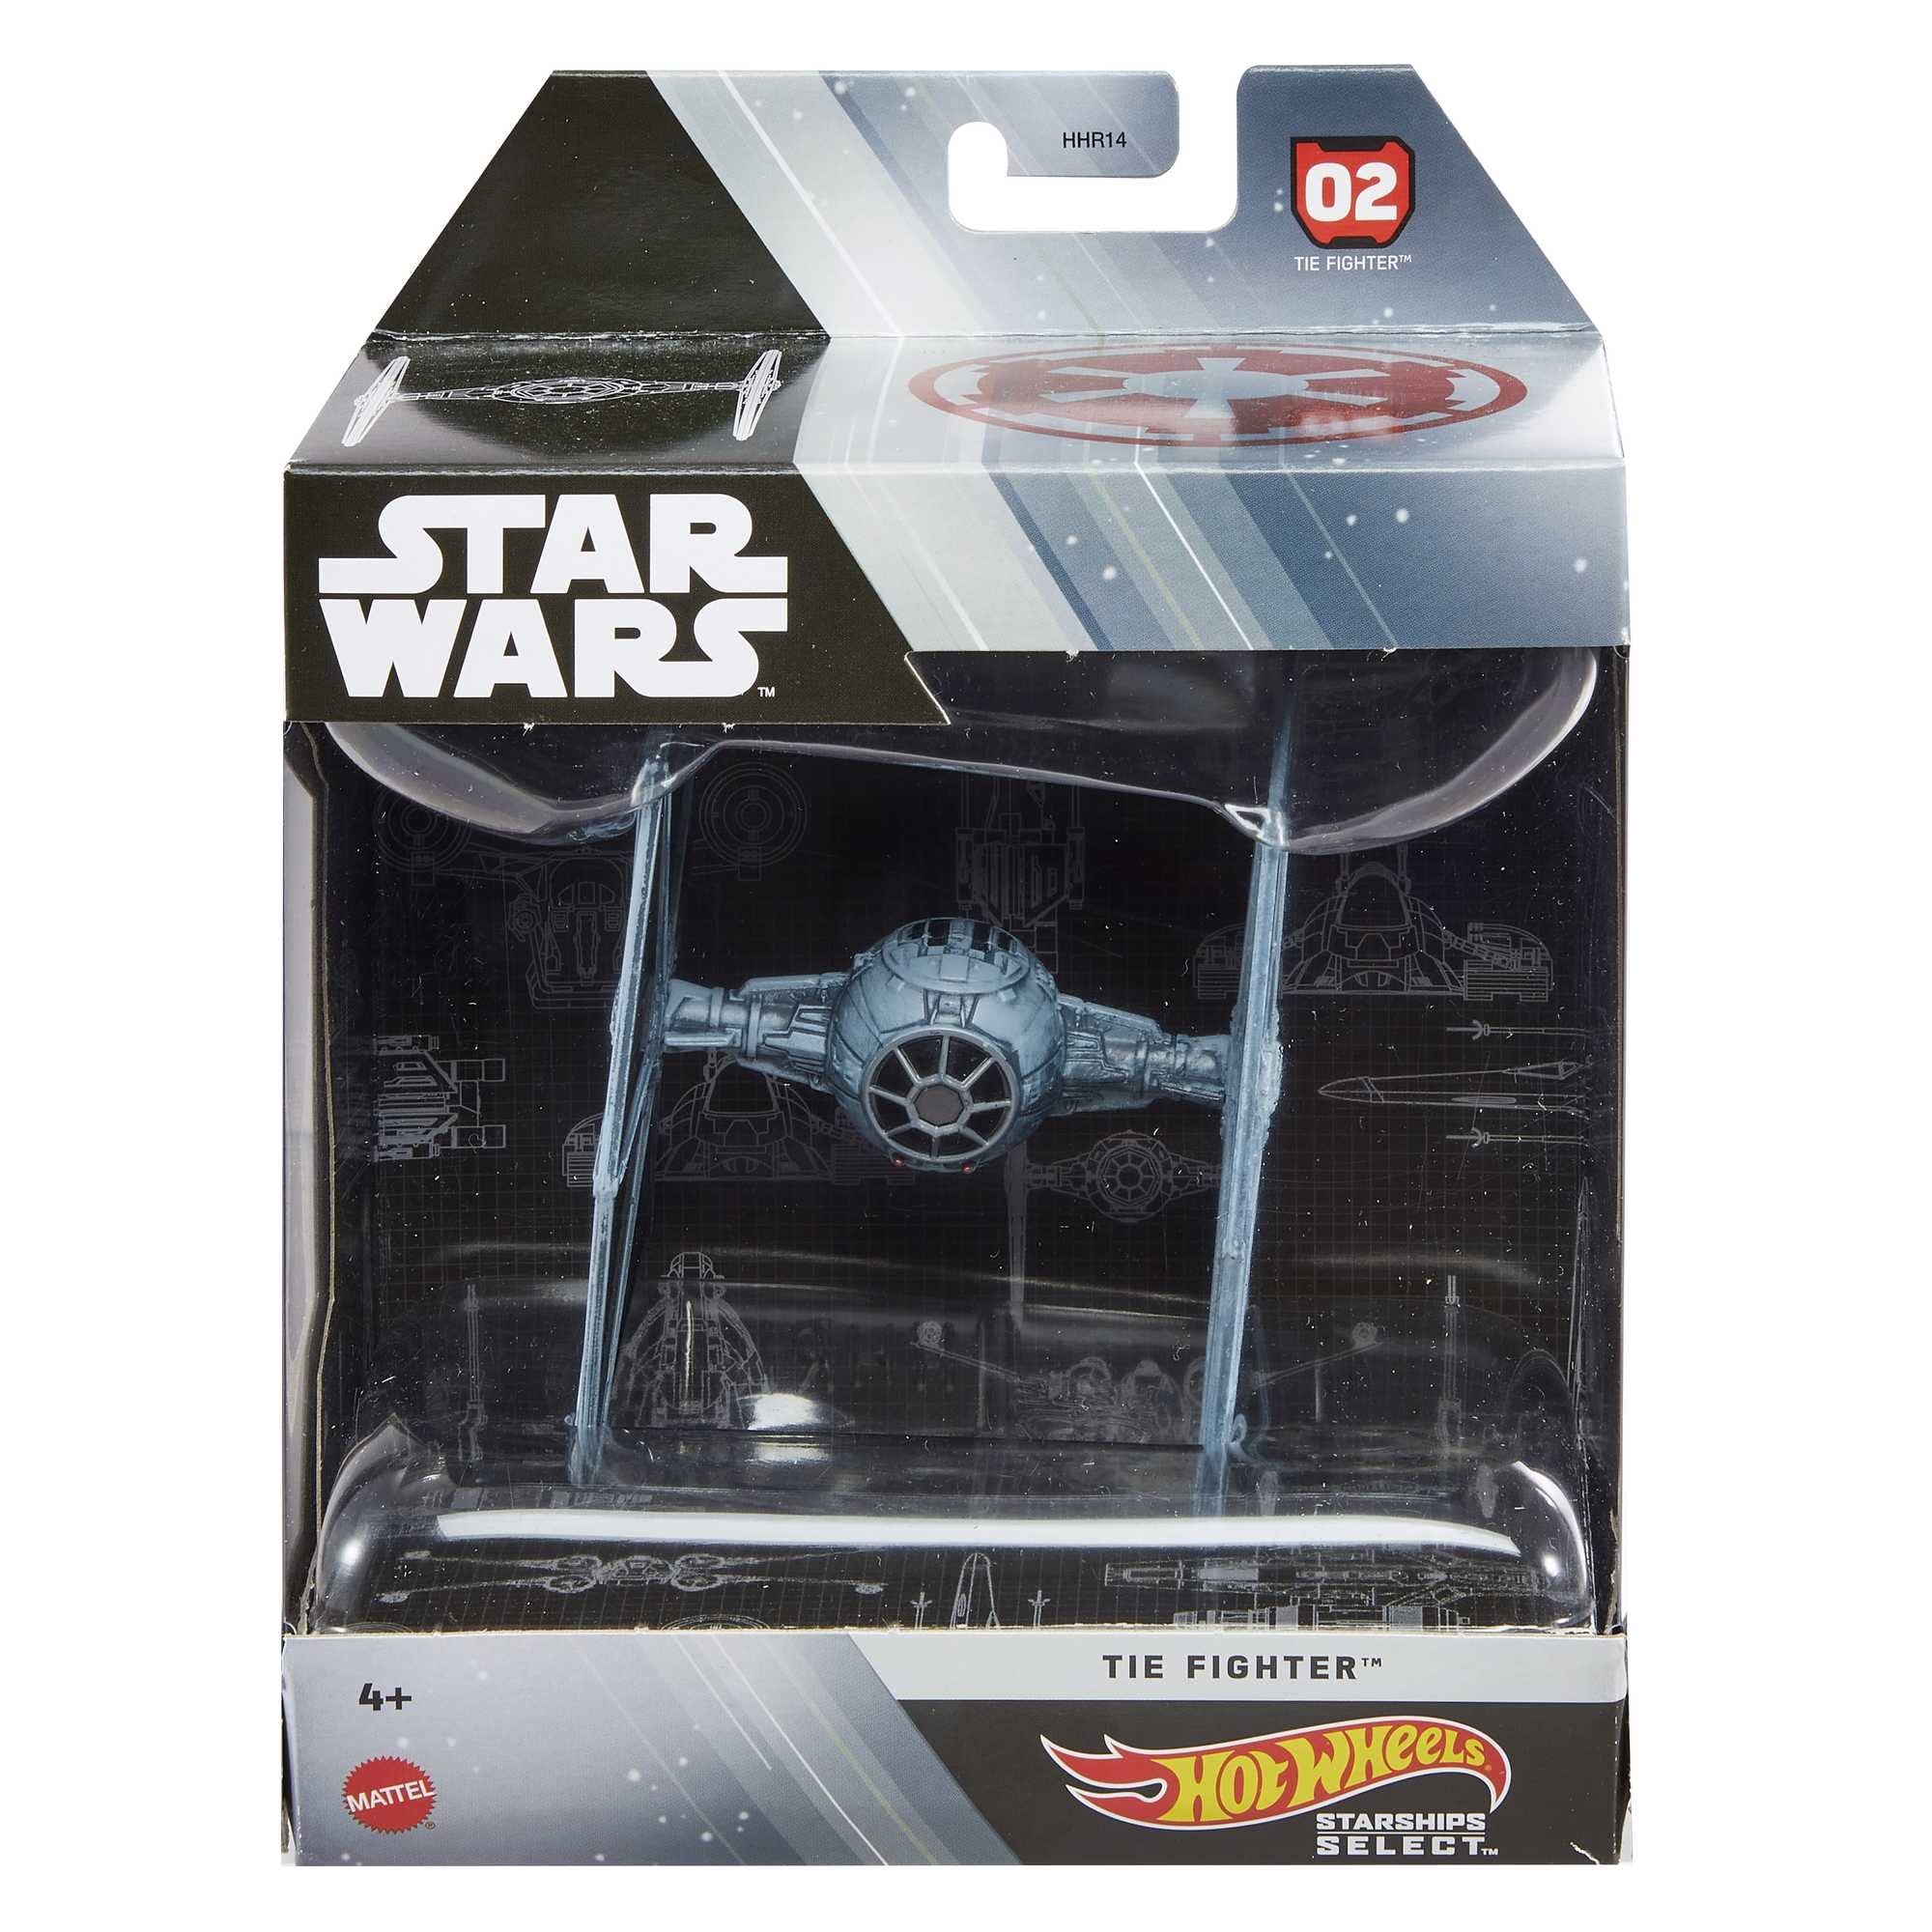 Hot Wheels Star Wars Starships Select, Premium Replica of Tie Fighter, Moveable Parts, Premium Stand, Gift for Adult Collectors, 1:50 Scale